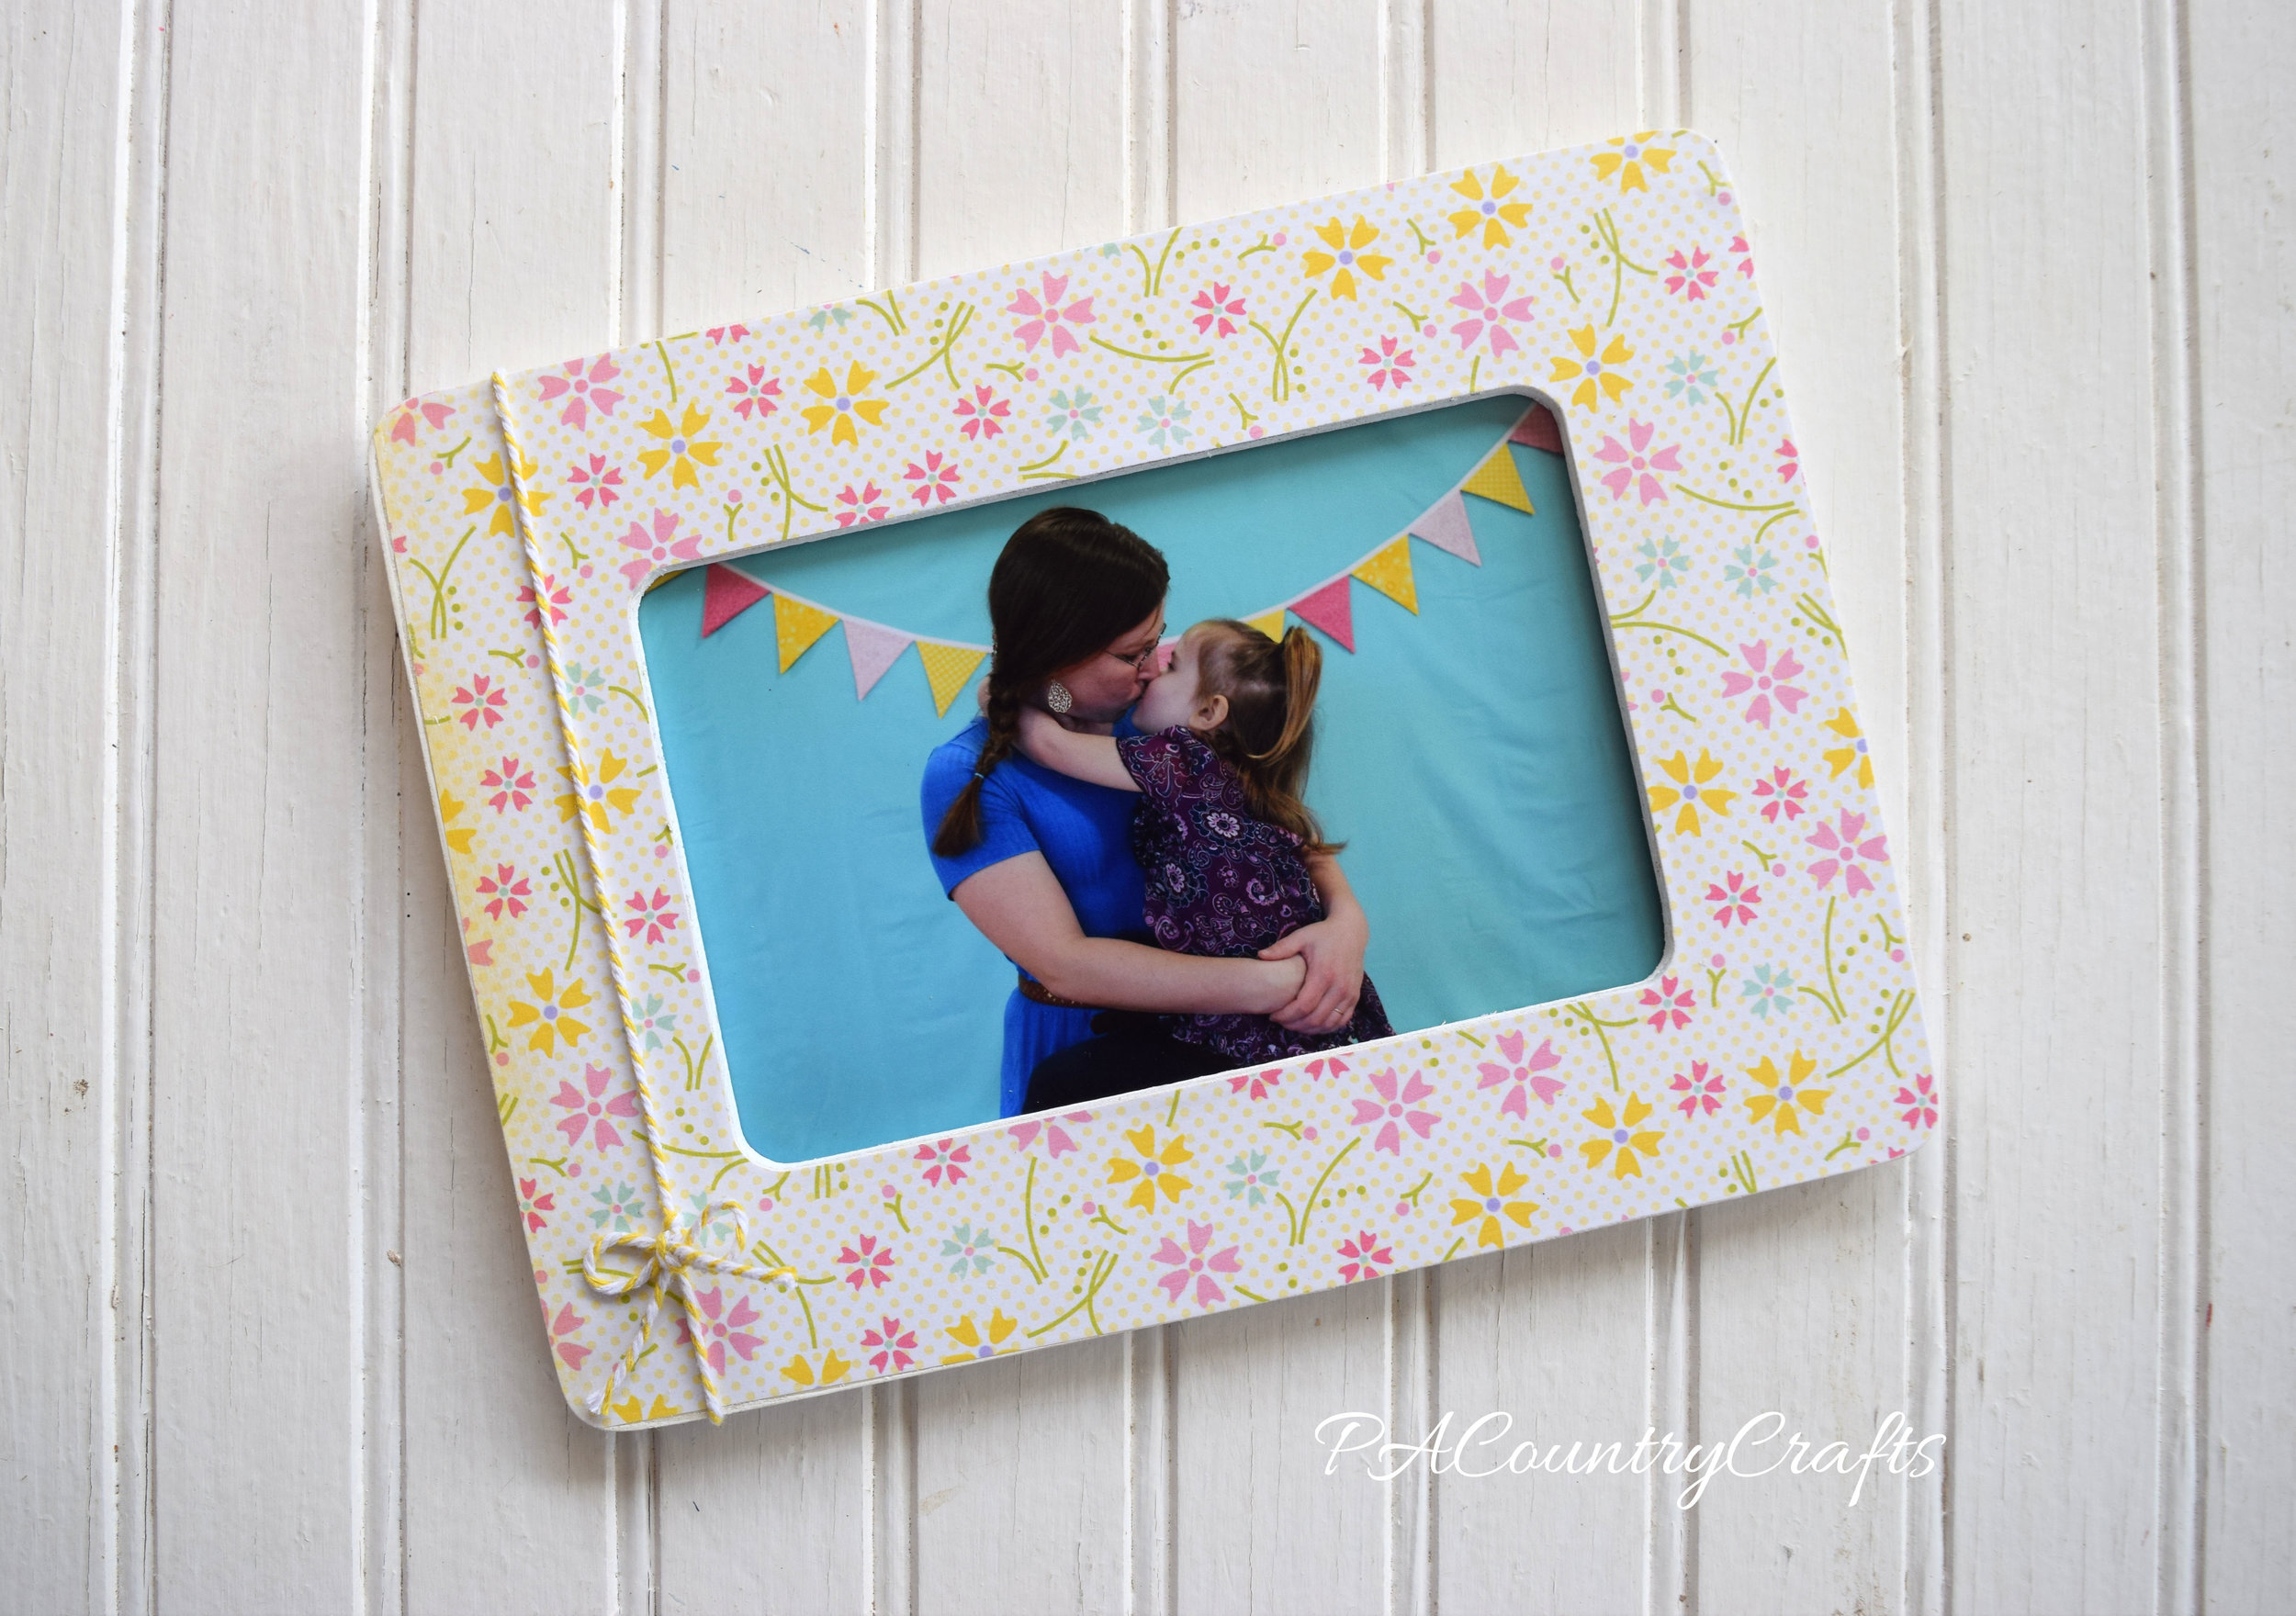 MOPS photo booth and picture frame craft